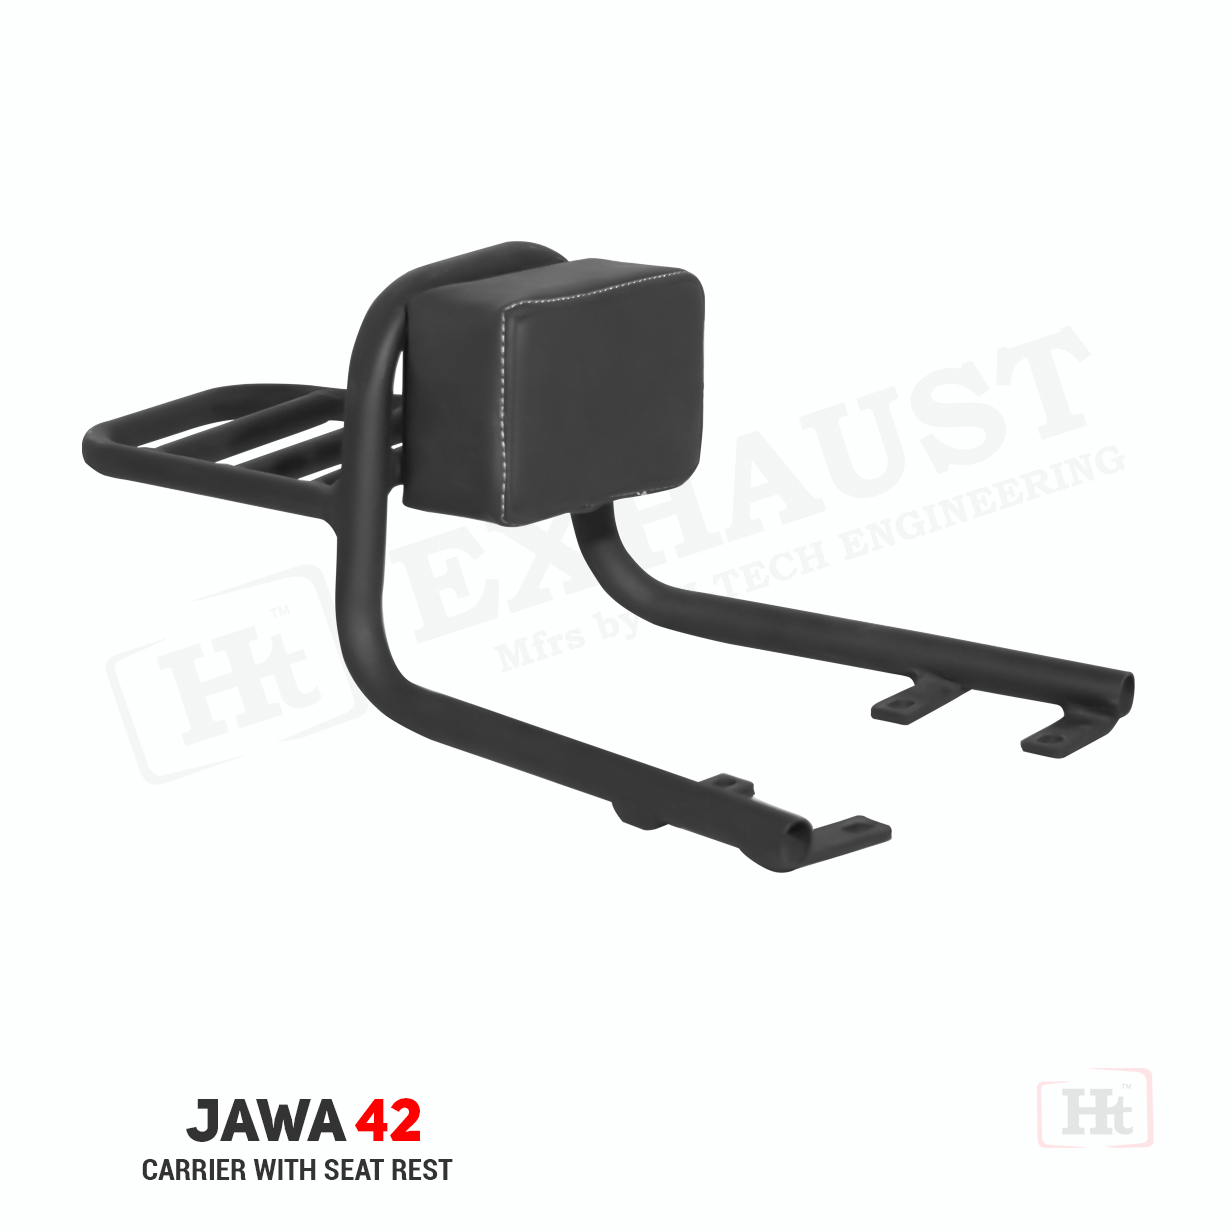 Jawa 42 Carrier With Seat Rest JW 419 - Ht Exhaust